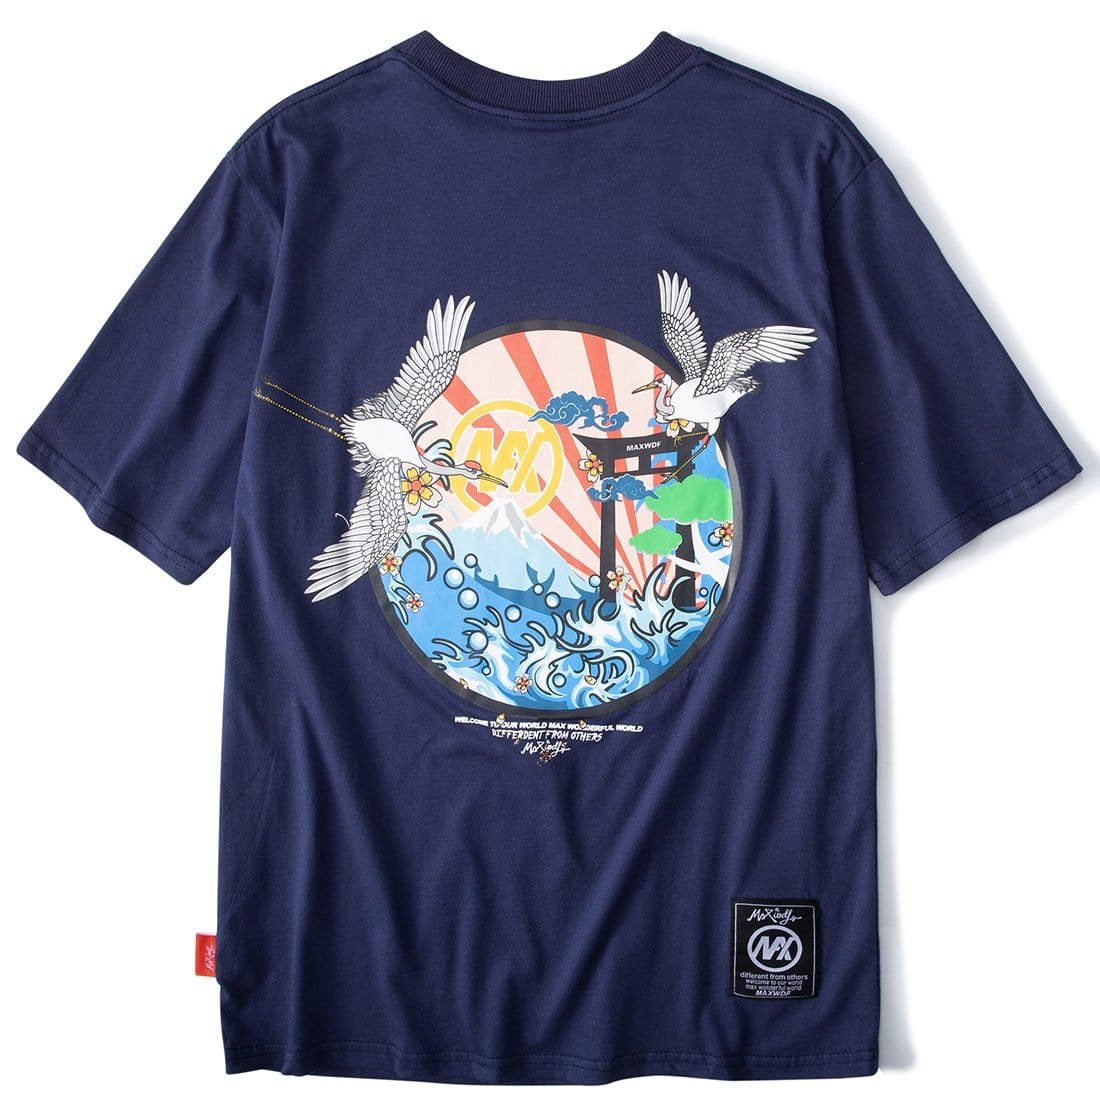 TO Cranes Over the Rolling Sea Tee